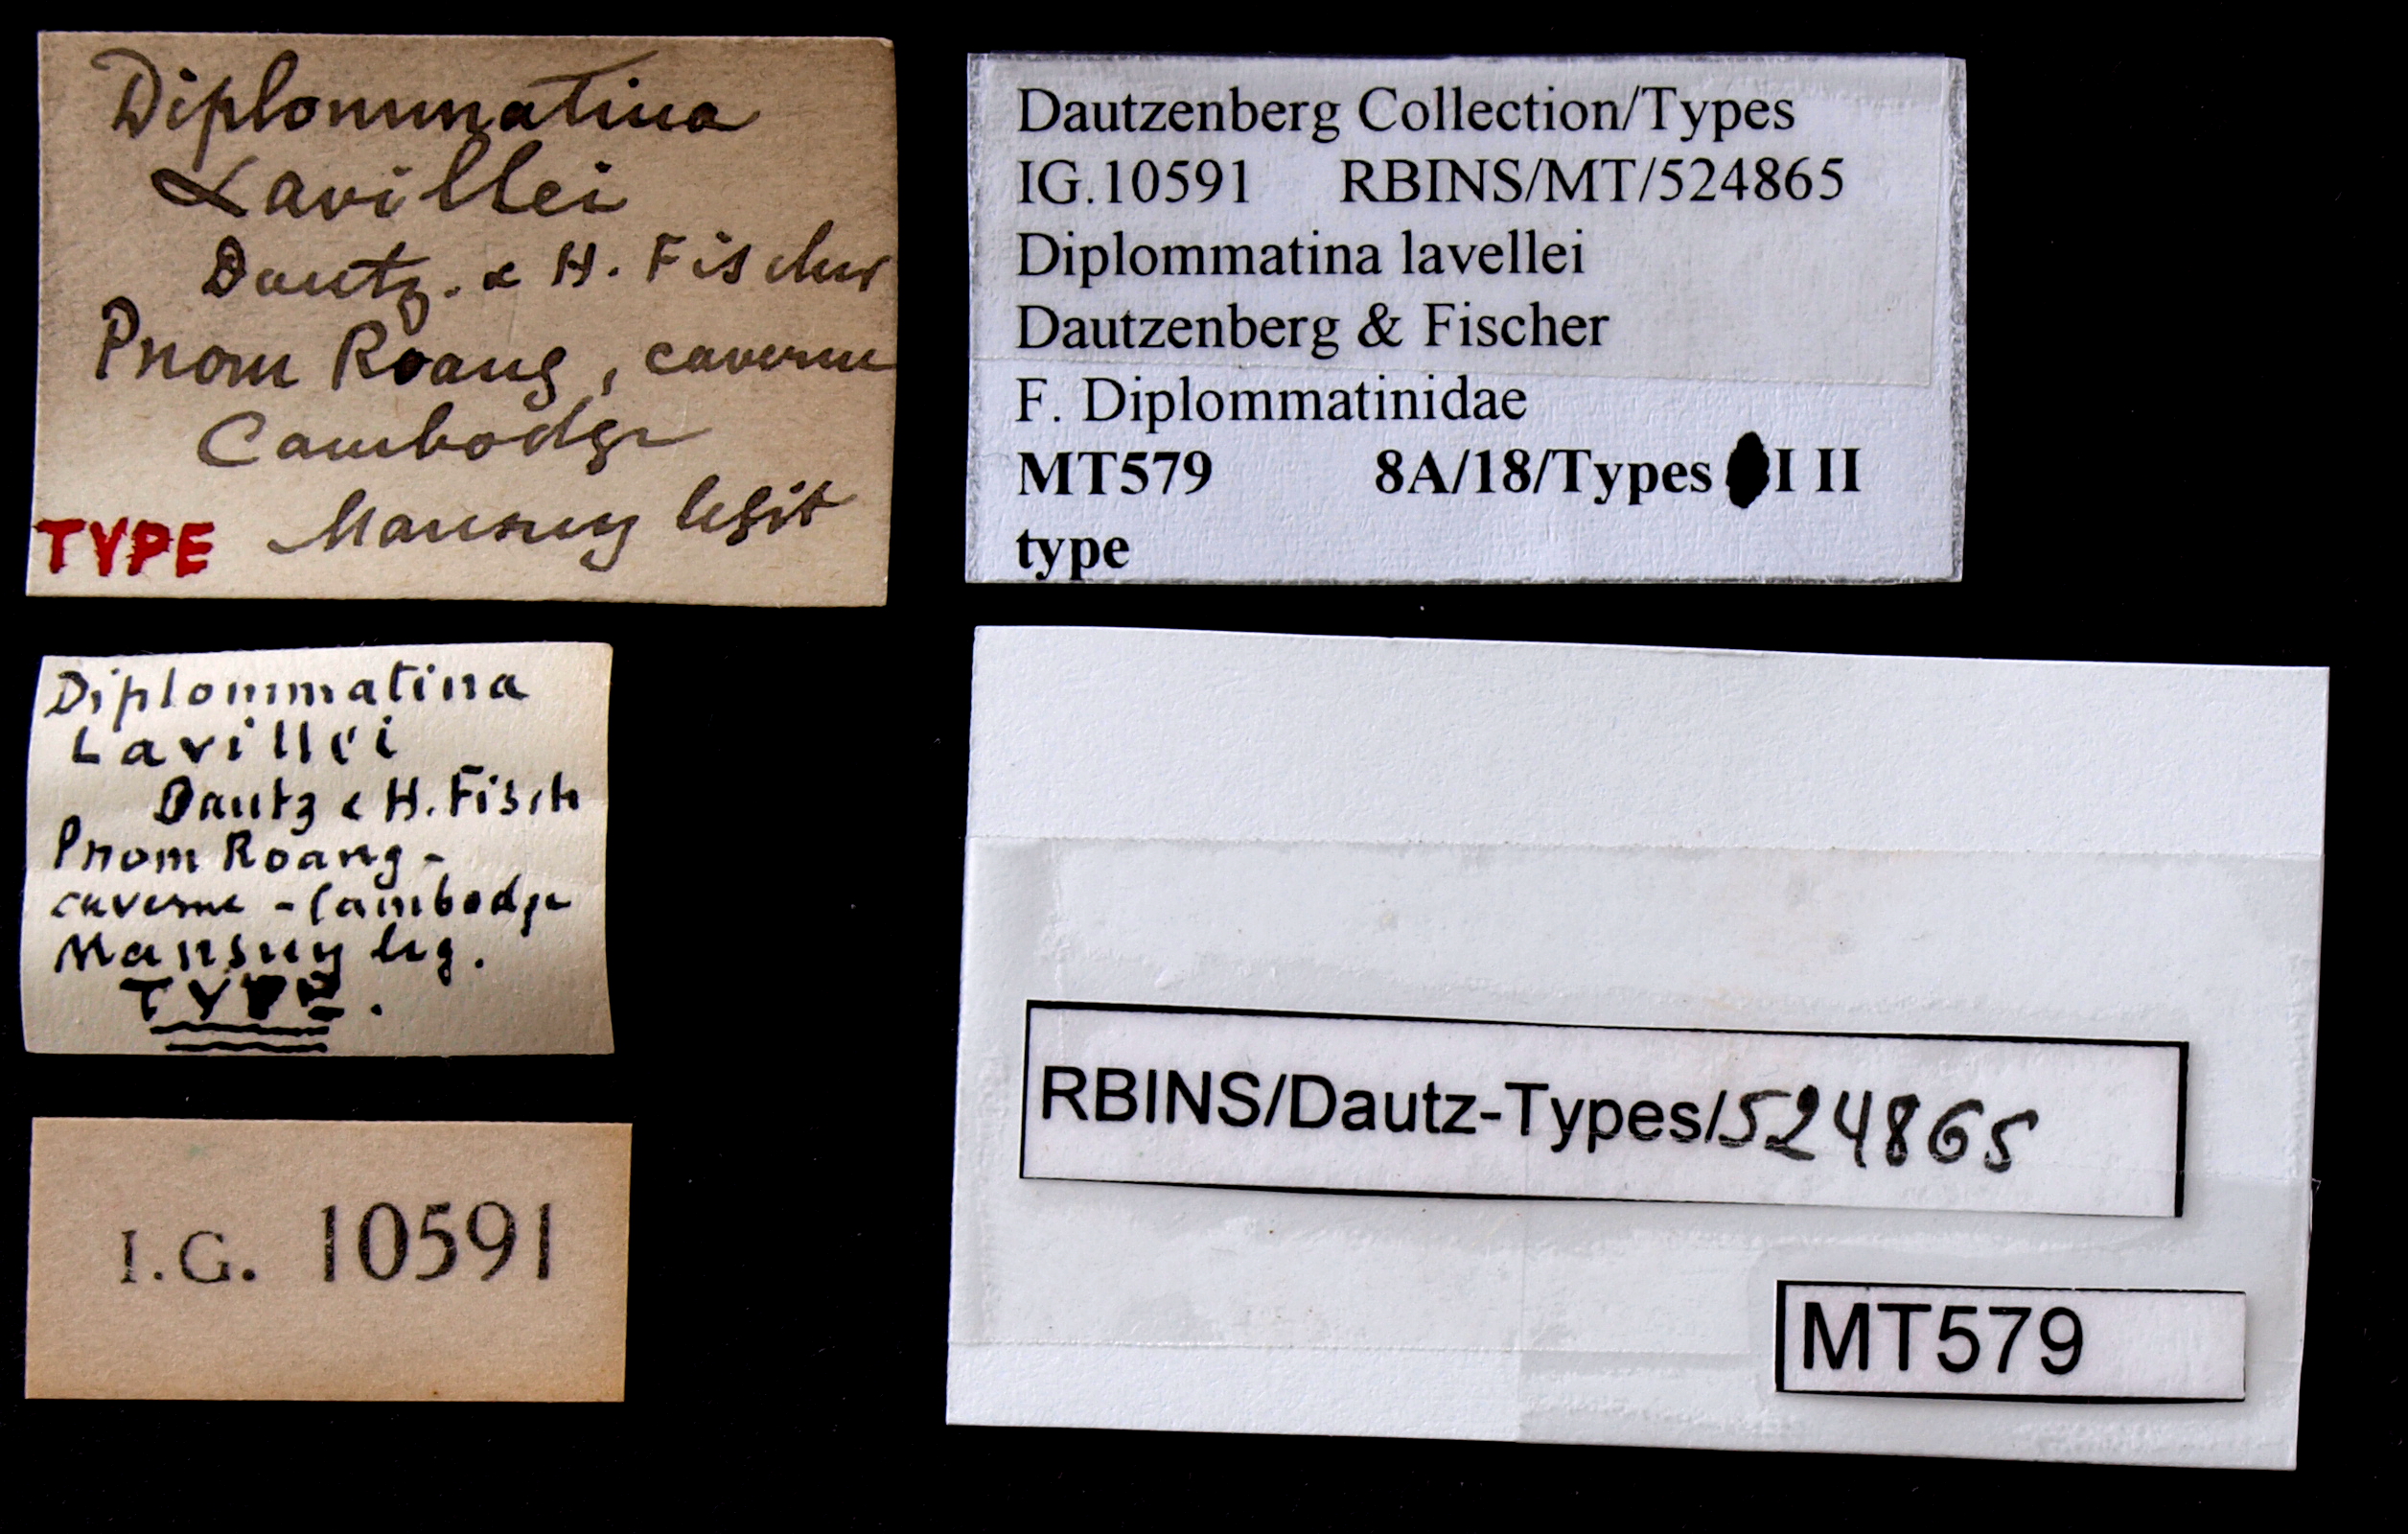 BE-RBINS-INV TYPE MT 579 Diplommatina lavillei LABELS.jpg